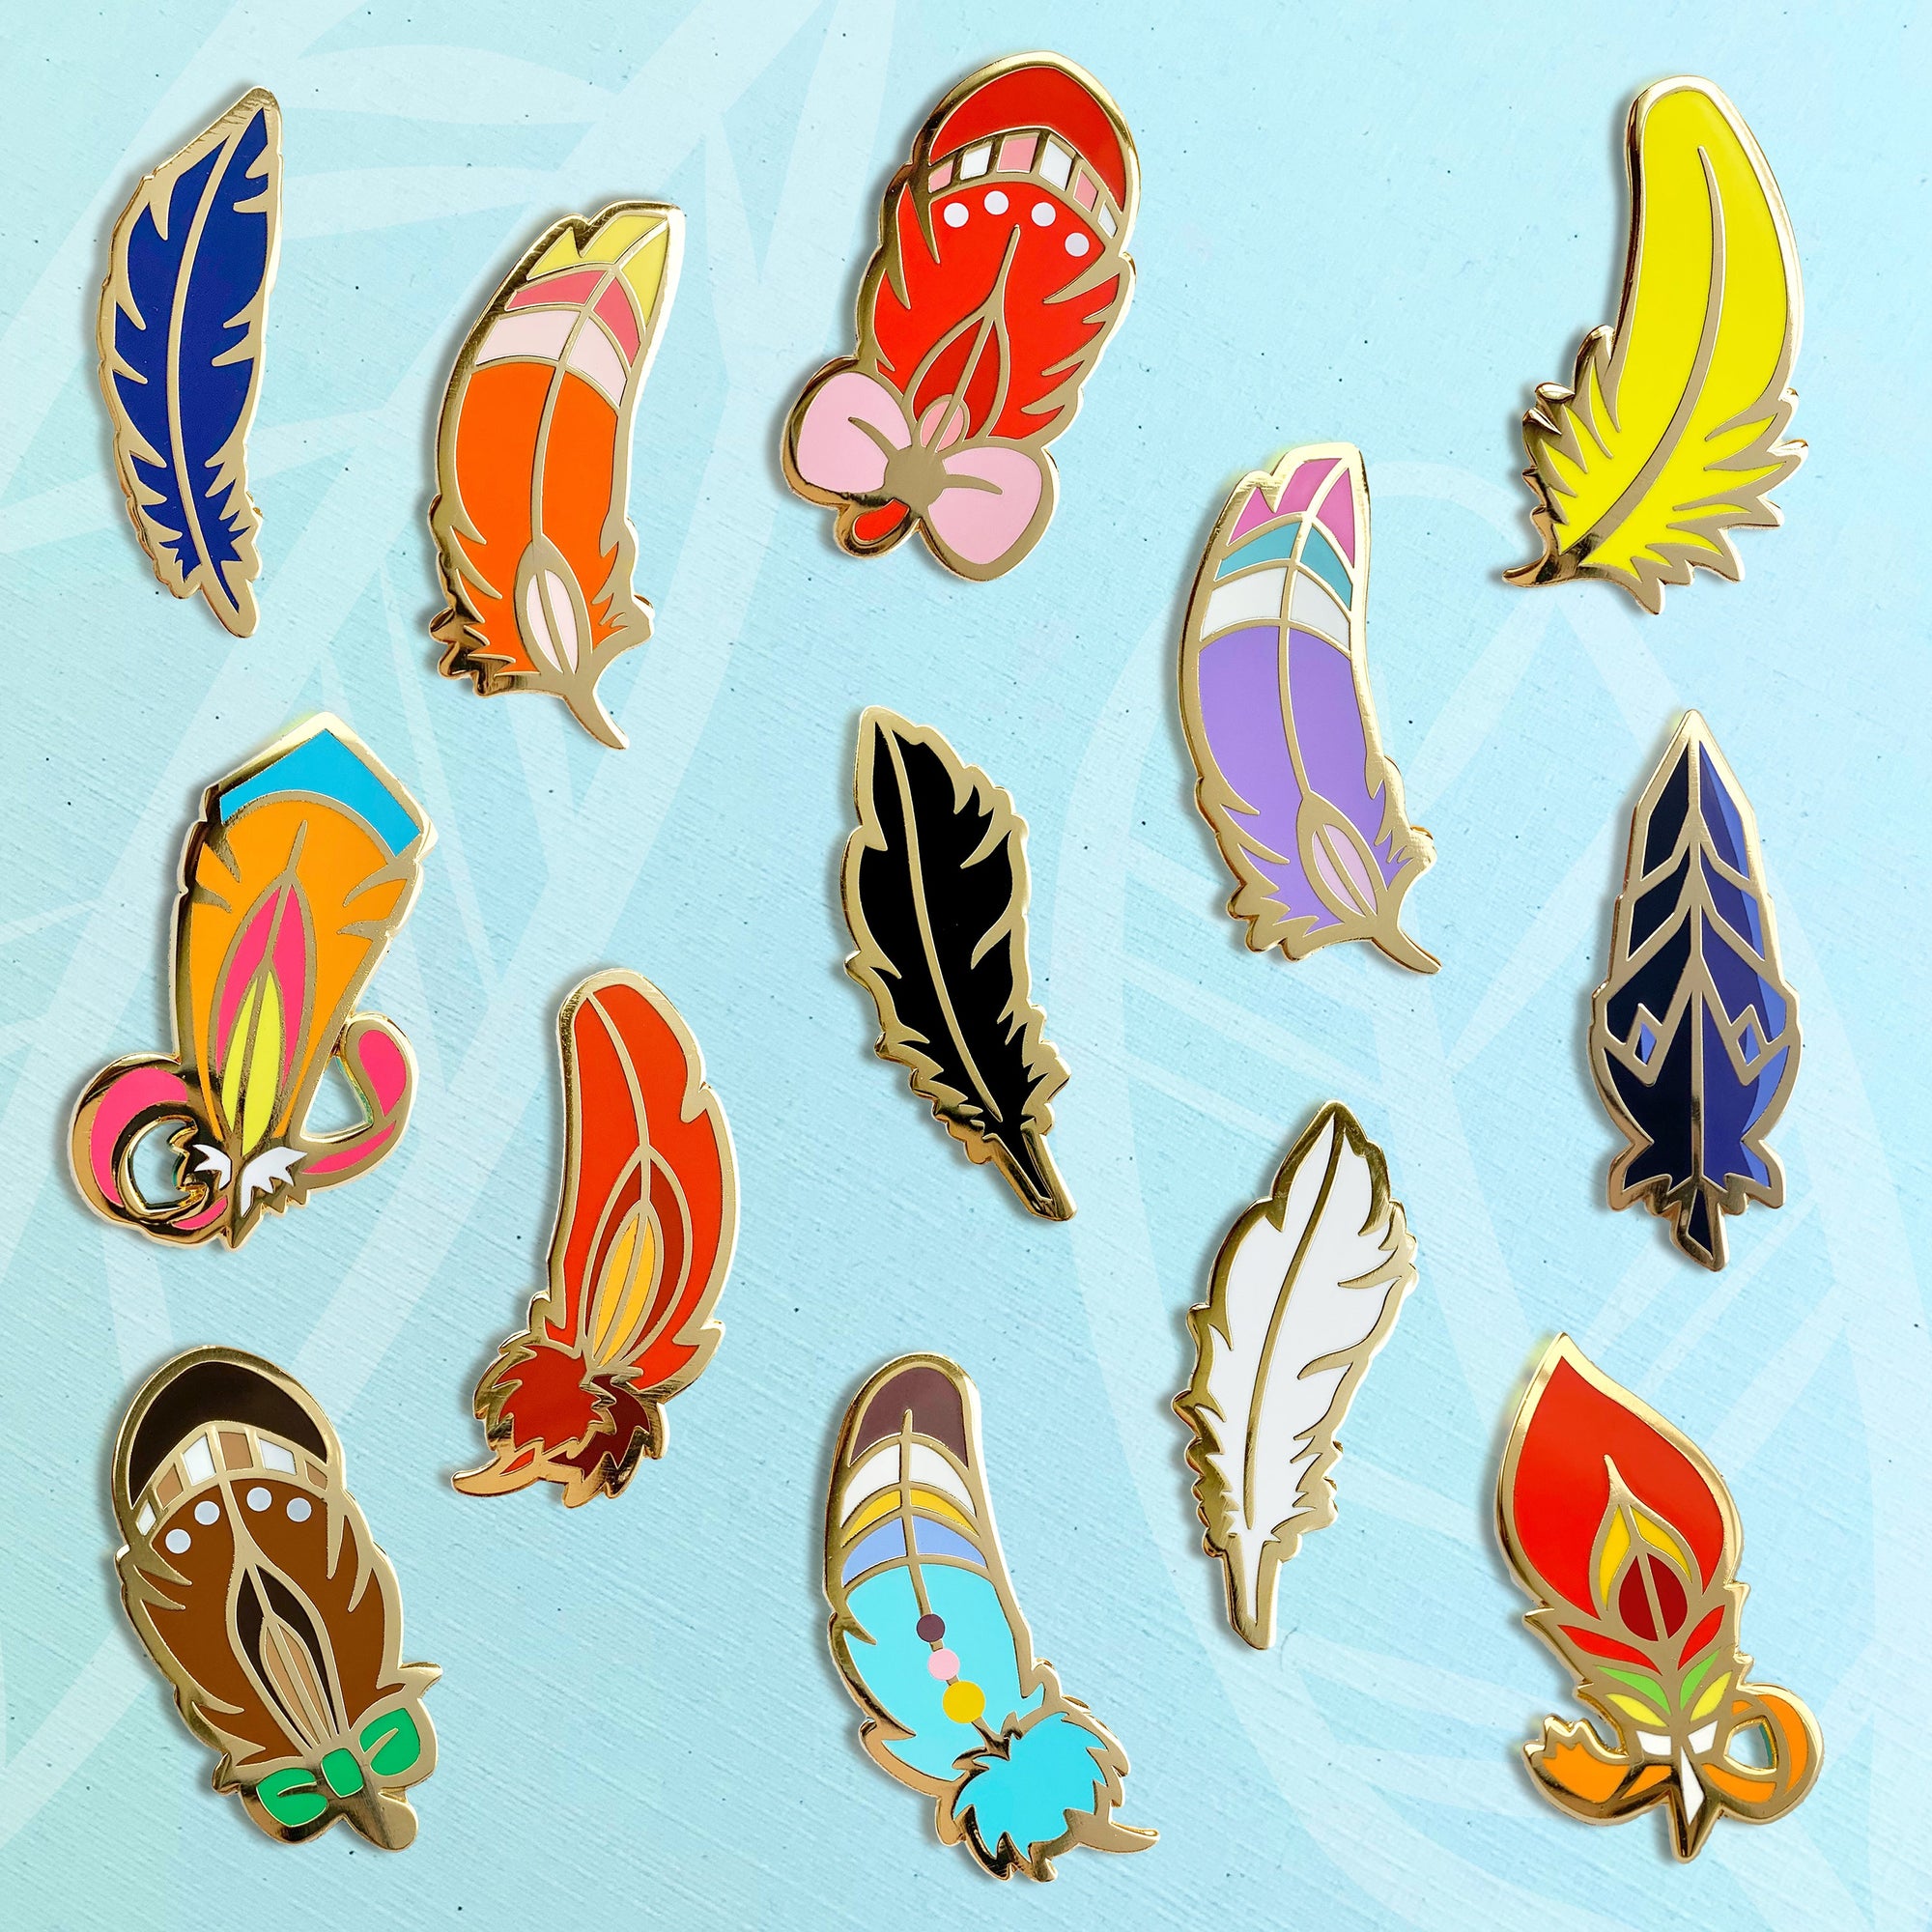 Chocobo Feather Enamel Pin by Shumi Collective